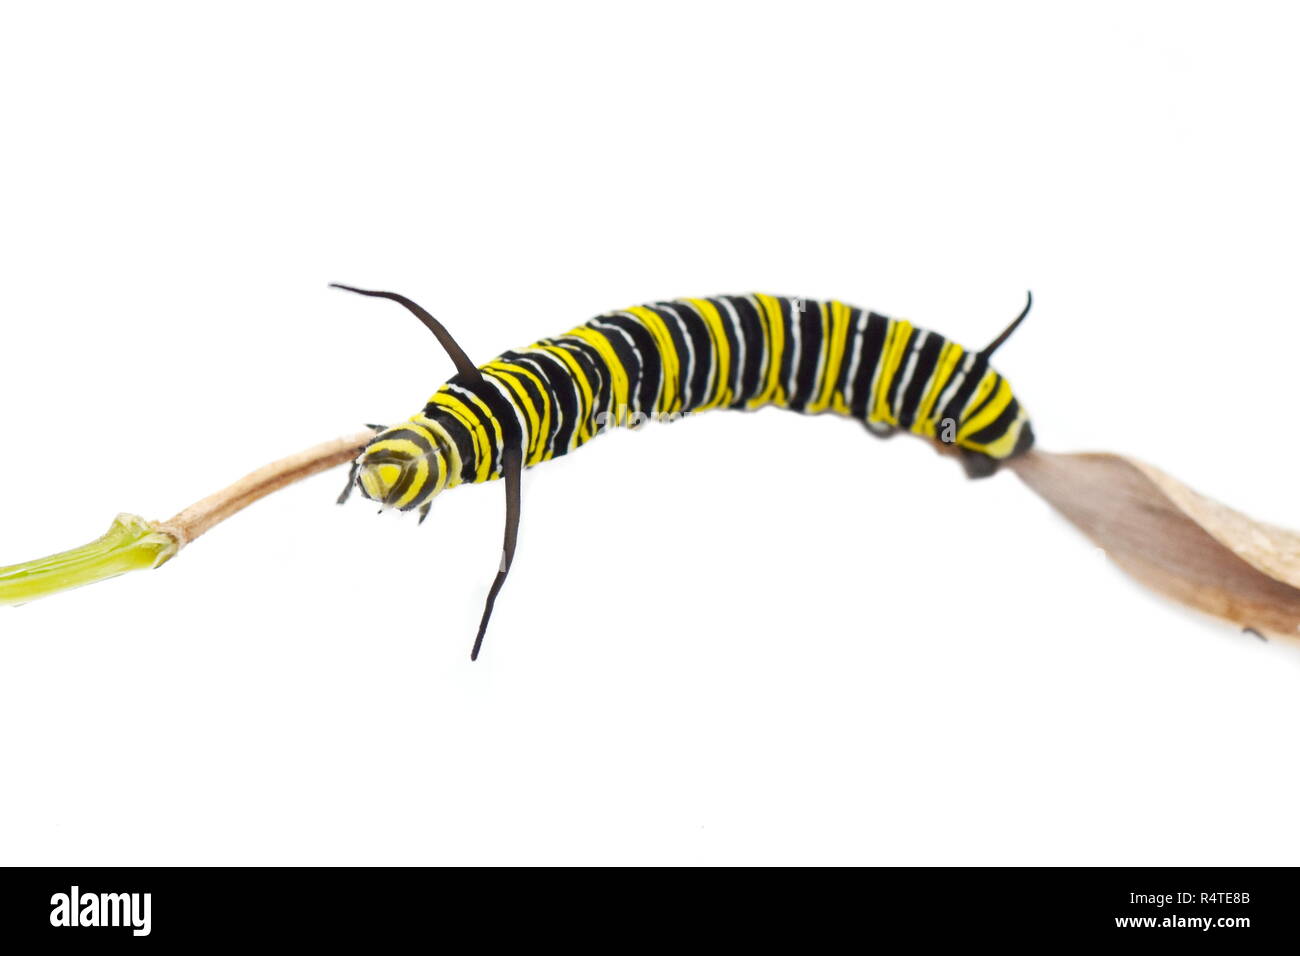 Monarch butterfly caterpillar on white background Stock Photo